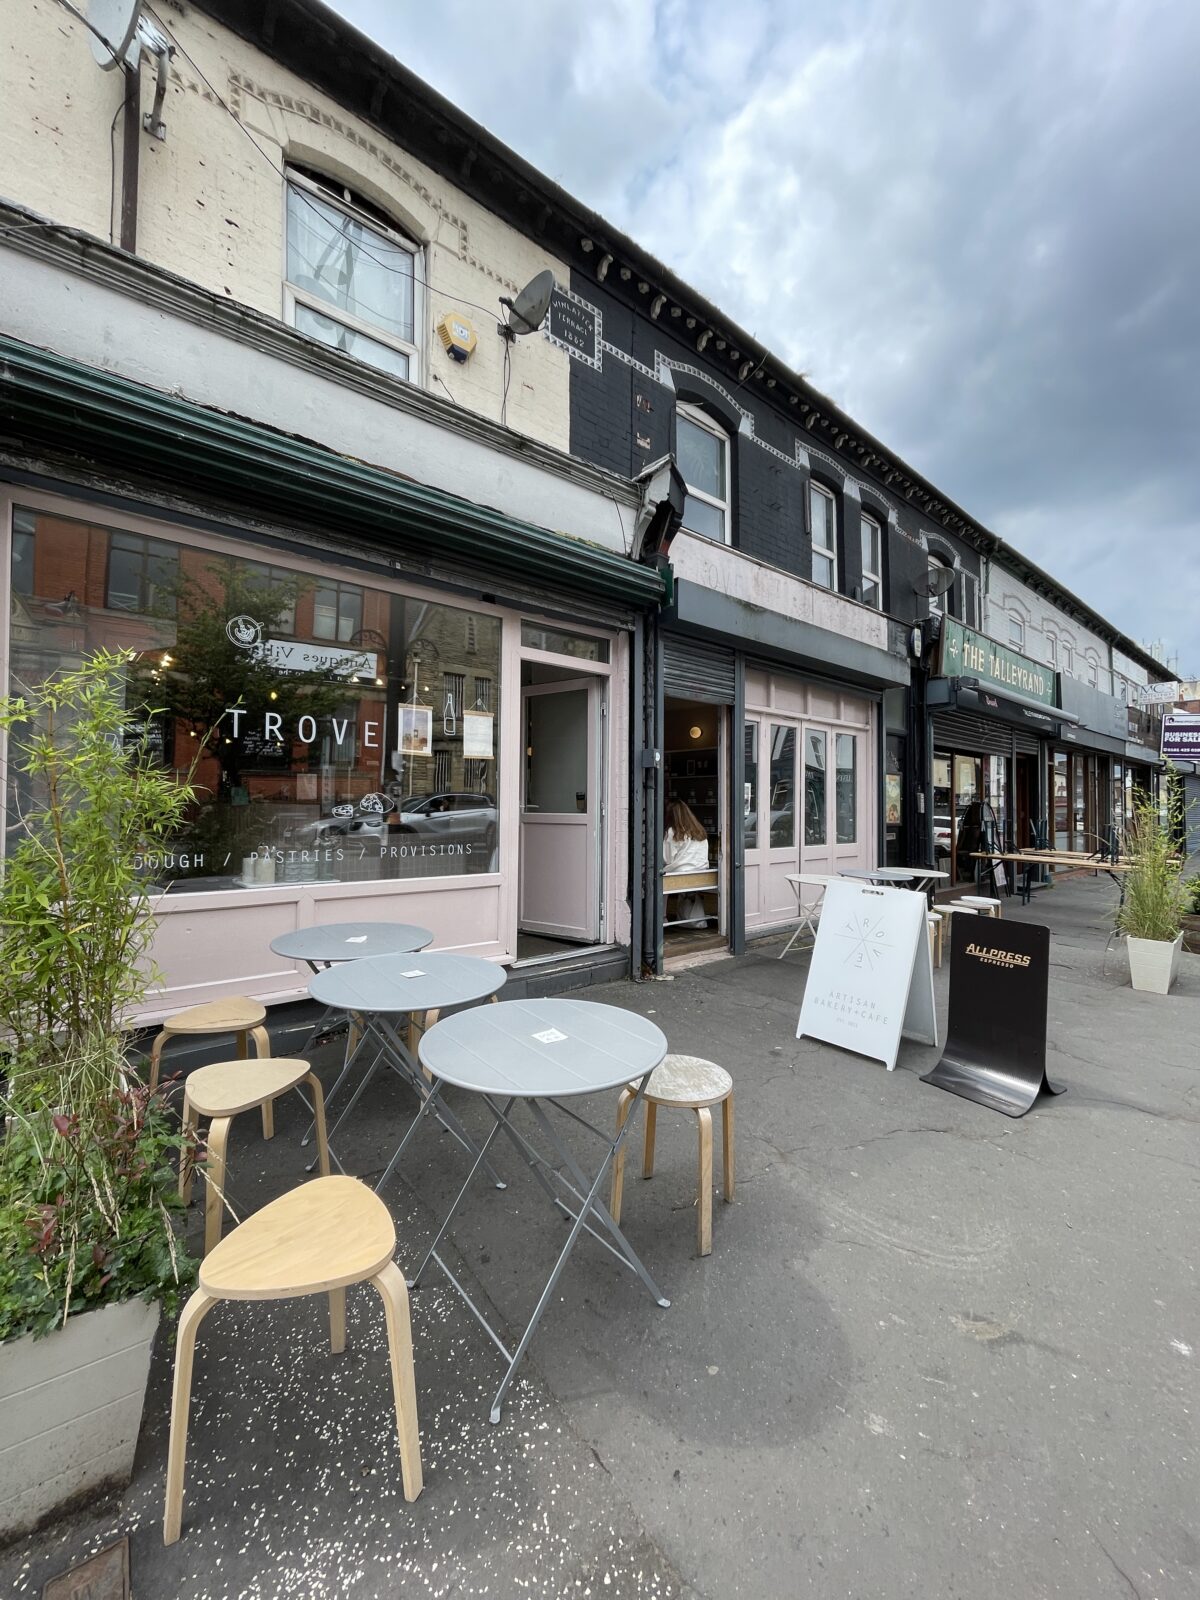 Outside seating at Trove's original restaurant and bakery in Levenshulme